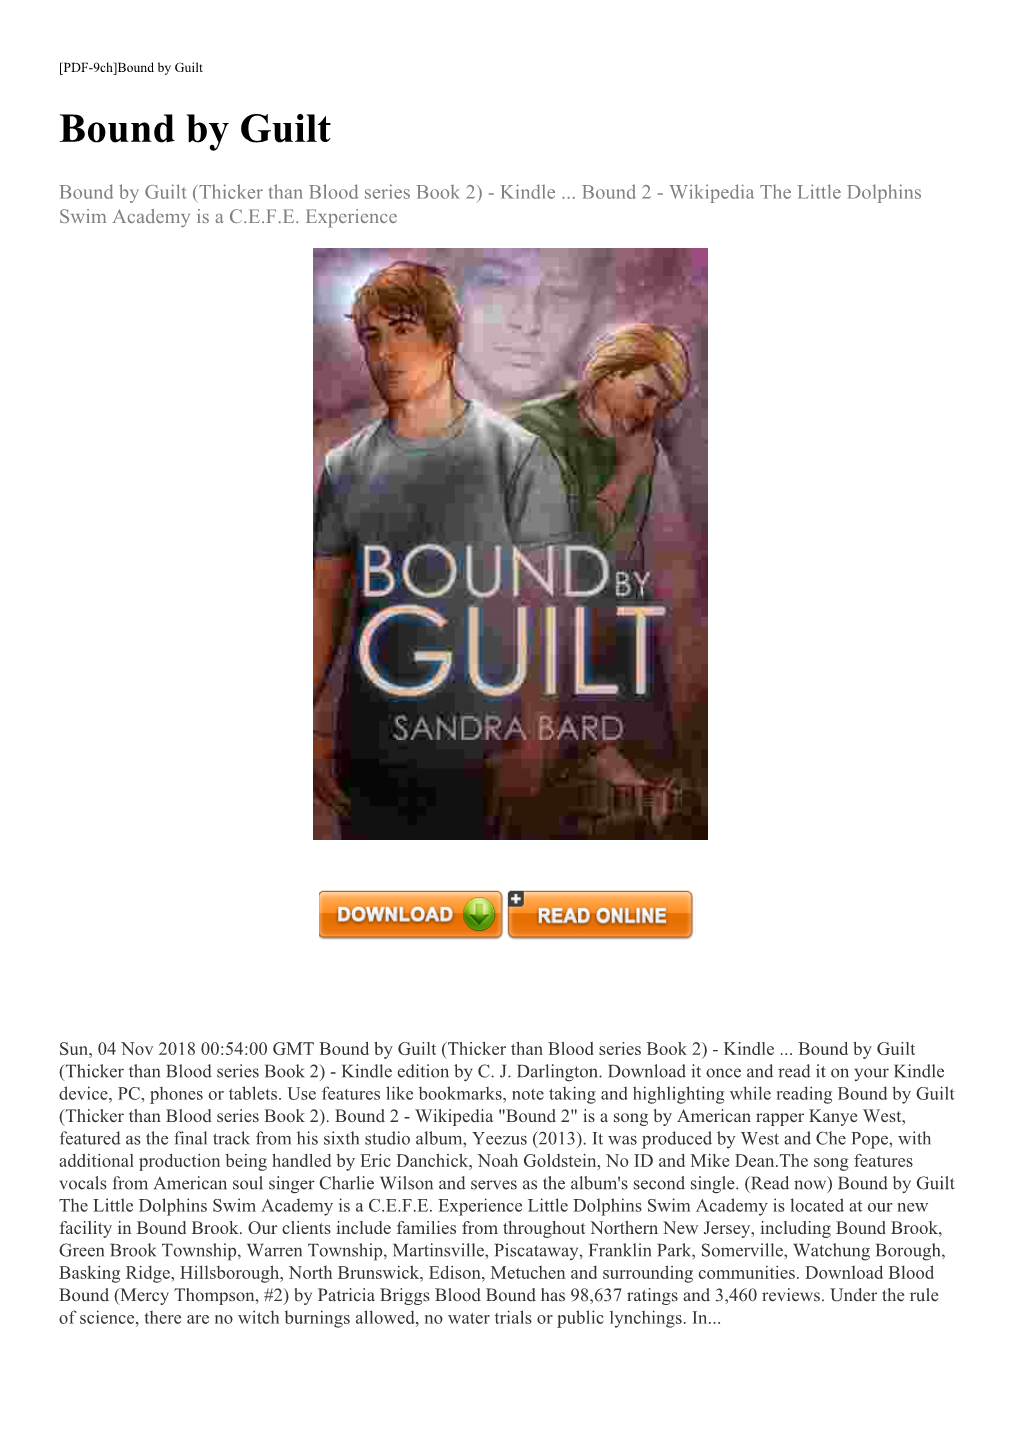 (Read Now) Bound by Guilt the Little Dolphins Swim Academy Is a C.E.F.E